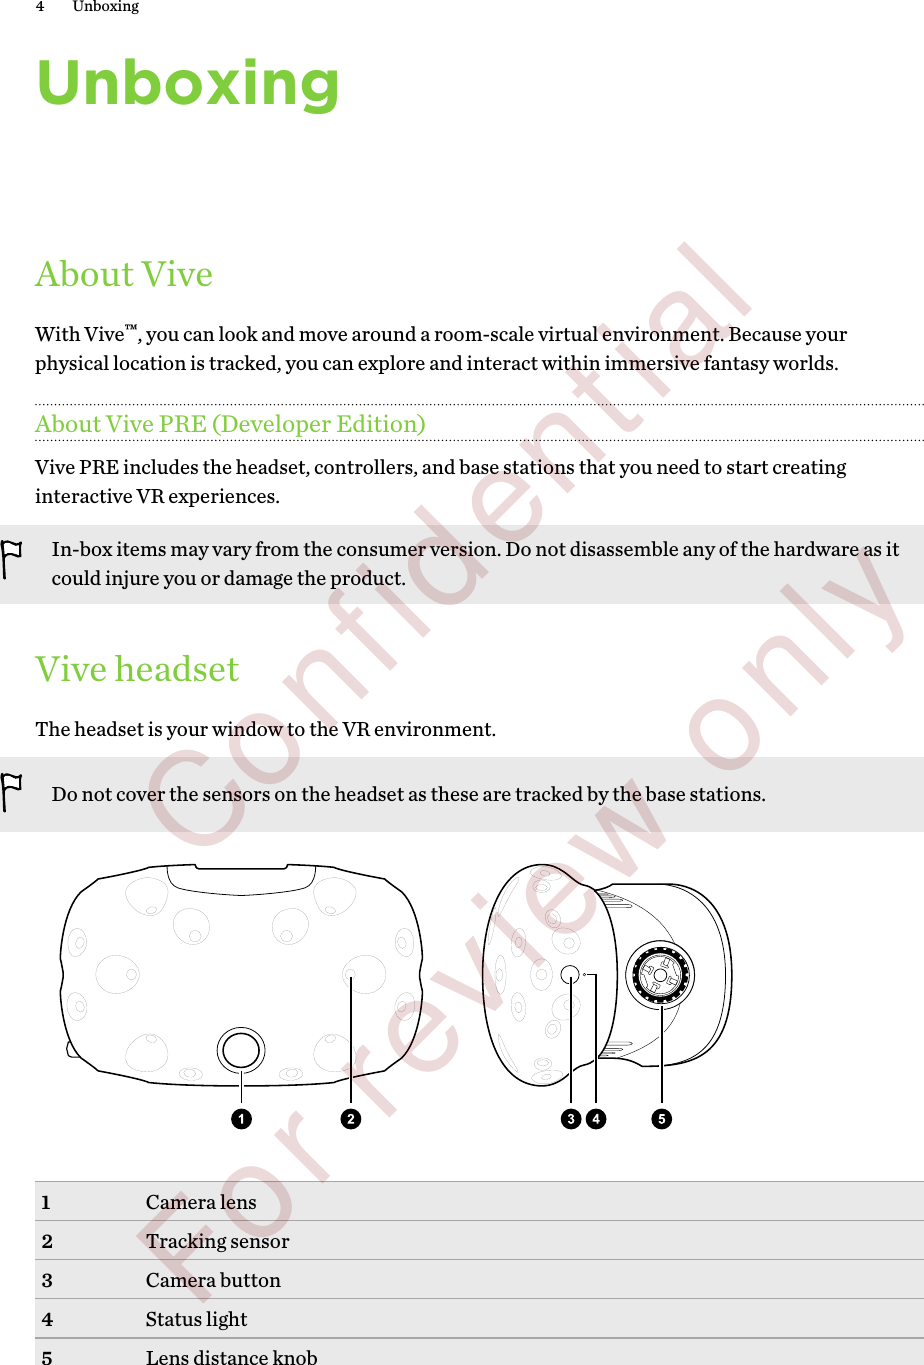 UnboxingAbout ViveWith Vive™, you can look and move around a room-scale virtual environment. Because yourphysical location is tracked, you can explore and interact within immersive fantasy worlds.About Vive PRE (Developer Edition)Vive PRE includes the headset, controllers, and base stations that you need to start creatinginteractive VR experiences.In-box items may vary from the consumer version. Do not disassemble any of the hardware as itcould injure you or damage the product.Vive headsetThe headset is your window to the VR environment.Do not cover the sensors on the headset as these are tracked by the base stations.1Camera lens2Tracking sensor3Camera button4Status light5Lens distance knob4 Unboxing        Confidential  For review only